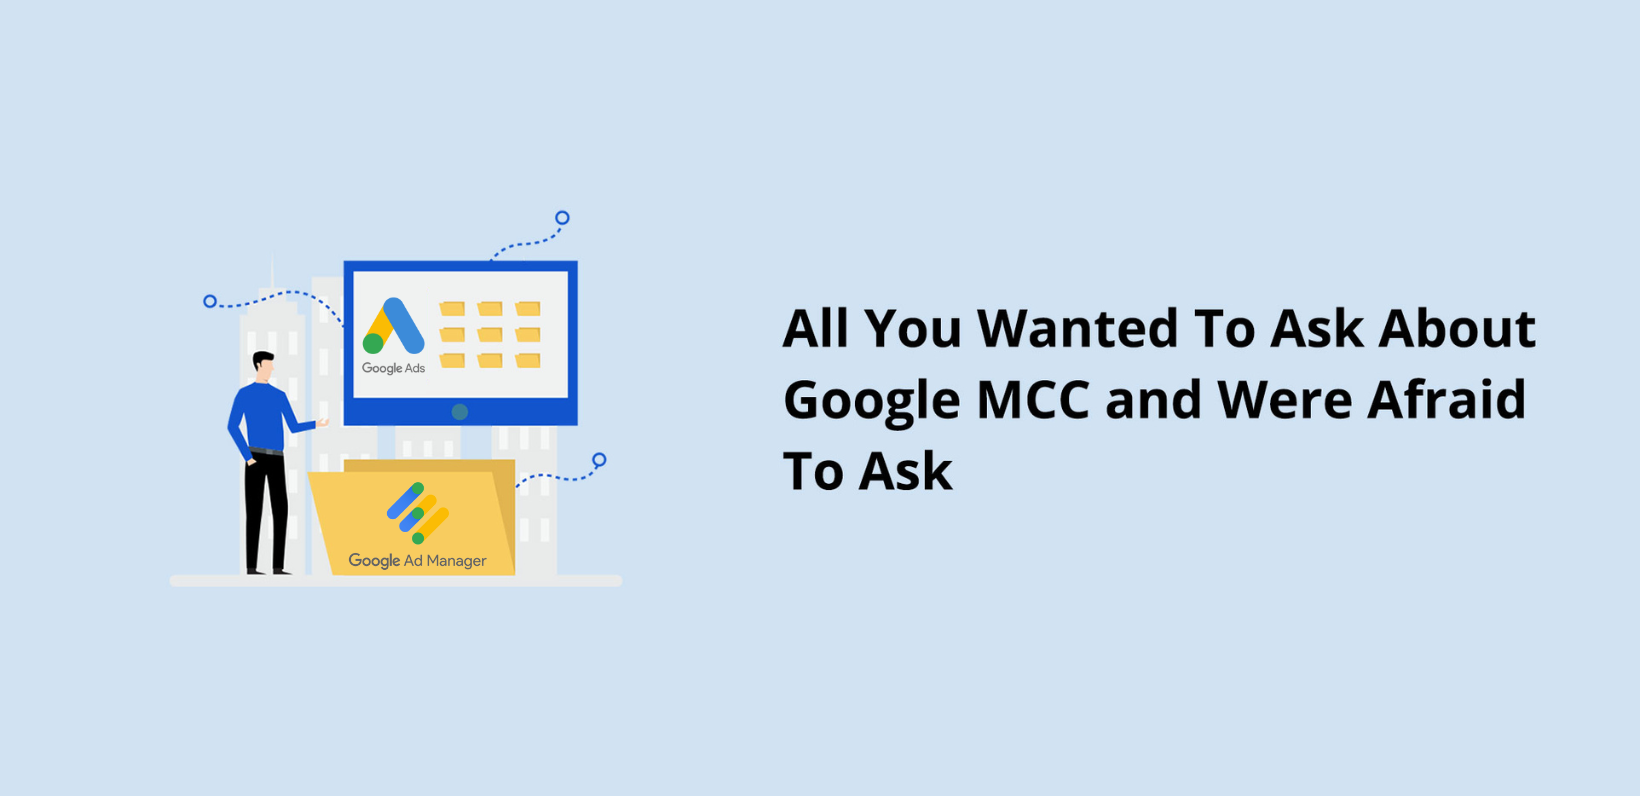 All You Wanted To Ask About Google MCC and Were Afraid To Ask